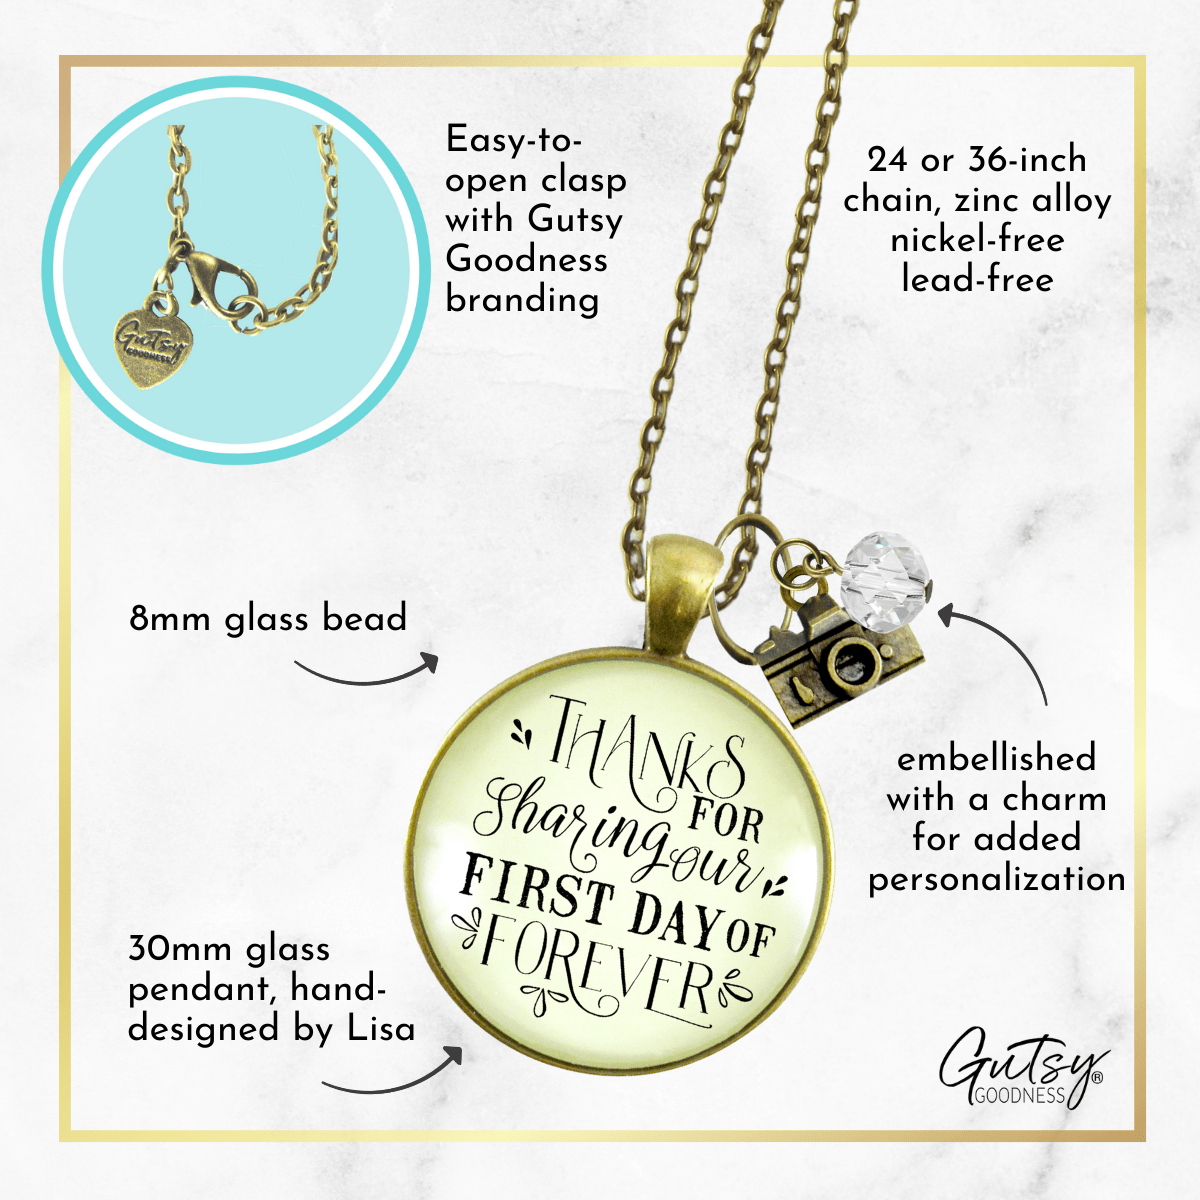 Gutsy Goodness Wedding Photographer Gift Necklace Thanks for Sharing Camera Charm - Gutsy Goodness Handmade Jewelry;Wedding Photographer Gift Necklace Thanks For Sharing Camera Charm - Gutsy Goodness Handmade Jewelry Gifts